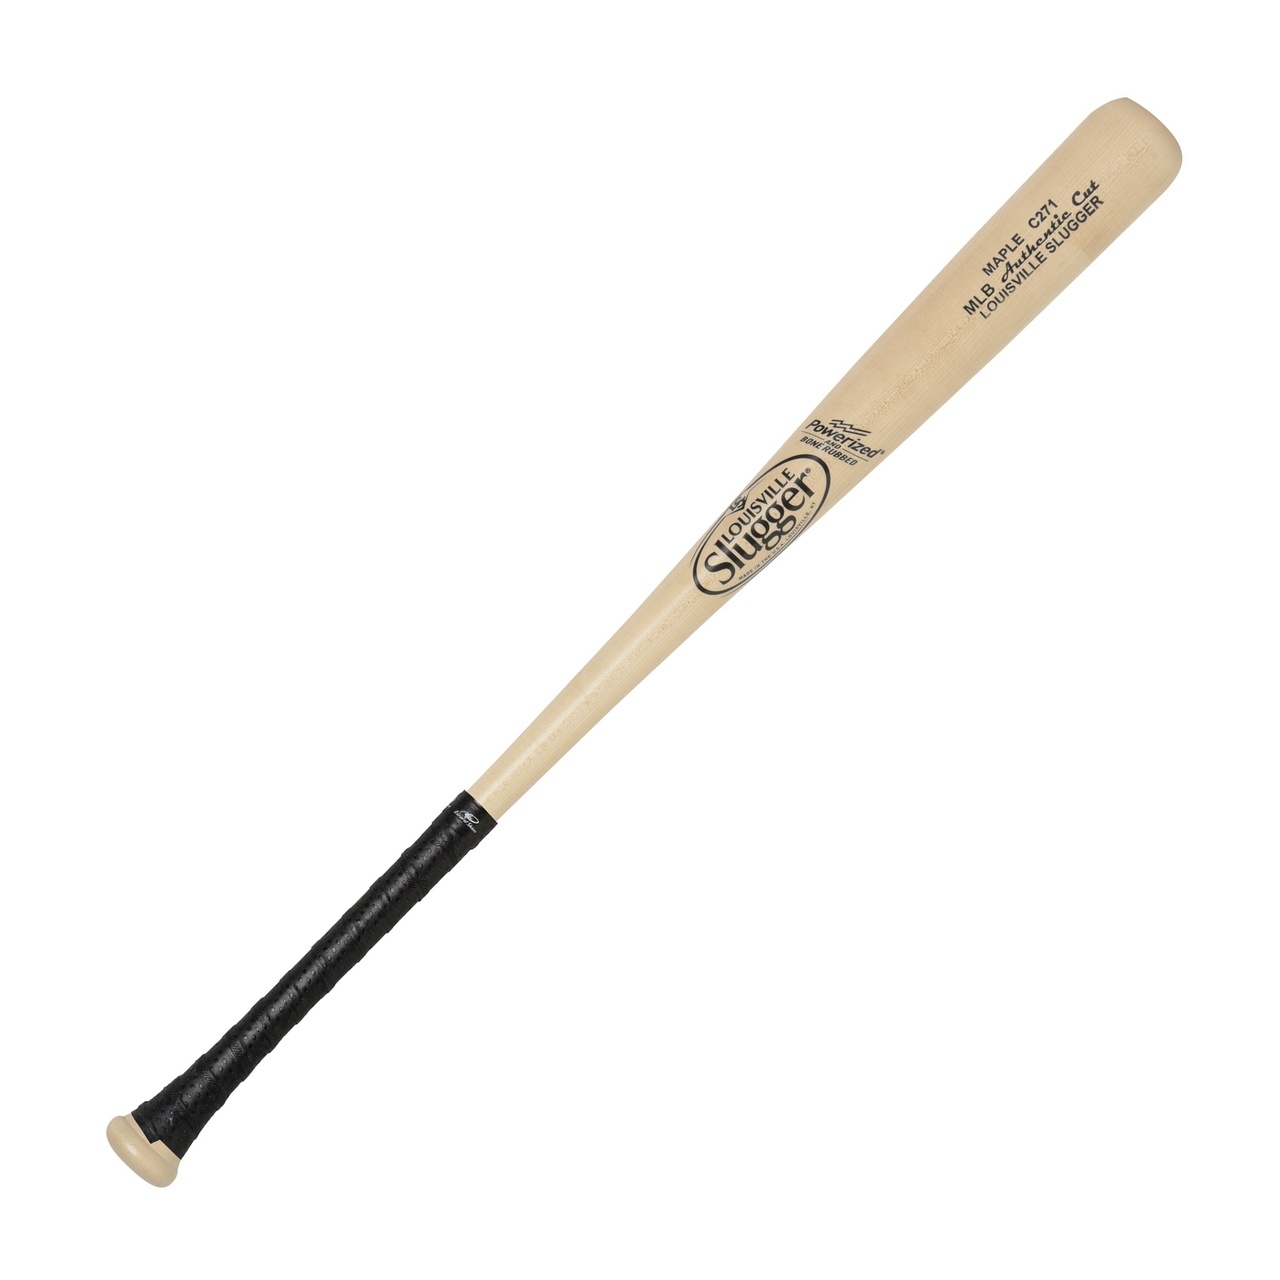 louisville-slugger-mlb-authentic-c271-maple-wood-baseball-bat-32-inch-lizard-grip WBCM271-NG32BK Louisville 044277133832 Inspired by the Pros.  Crafted for You.  MLB Authentic Cut features